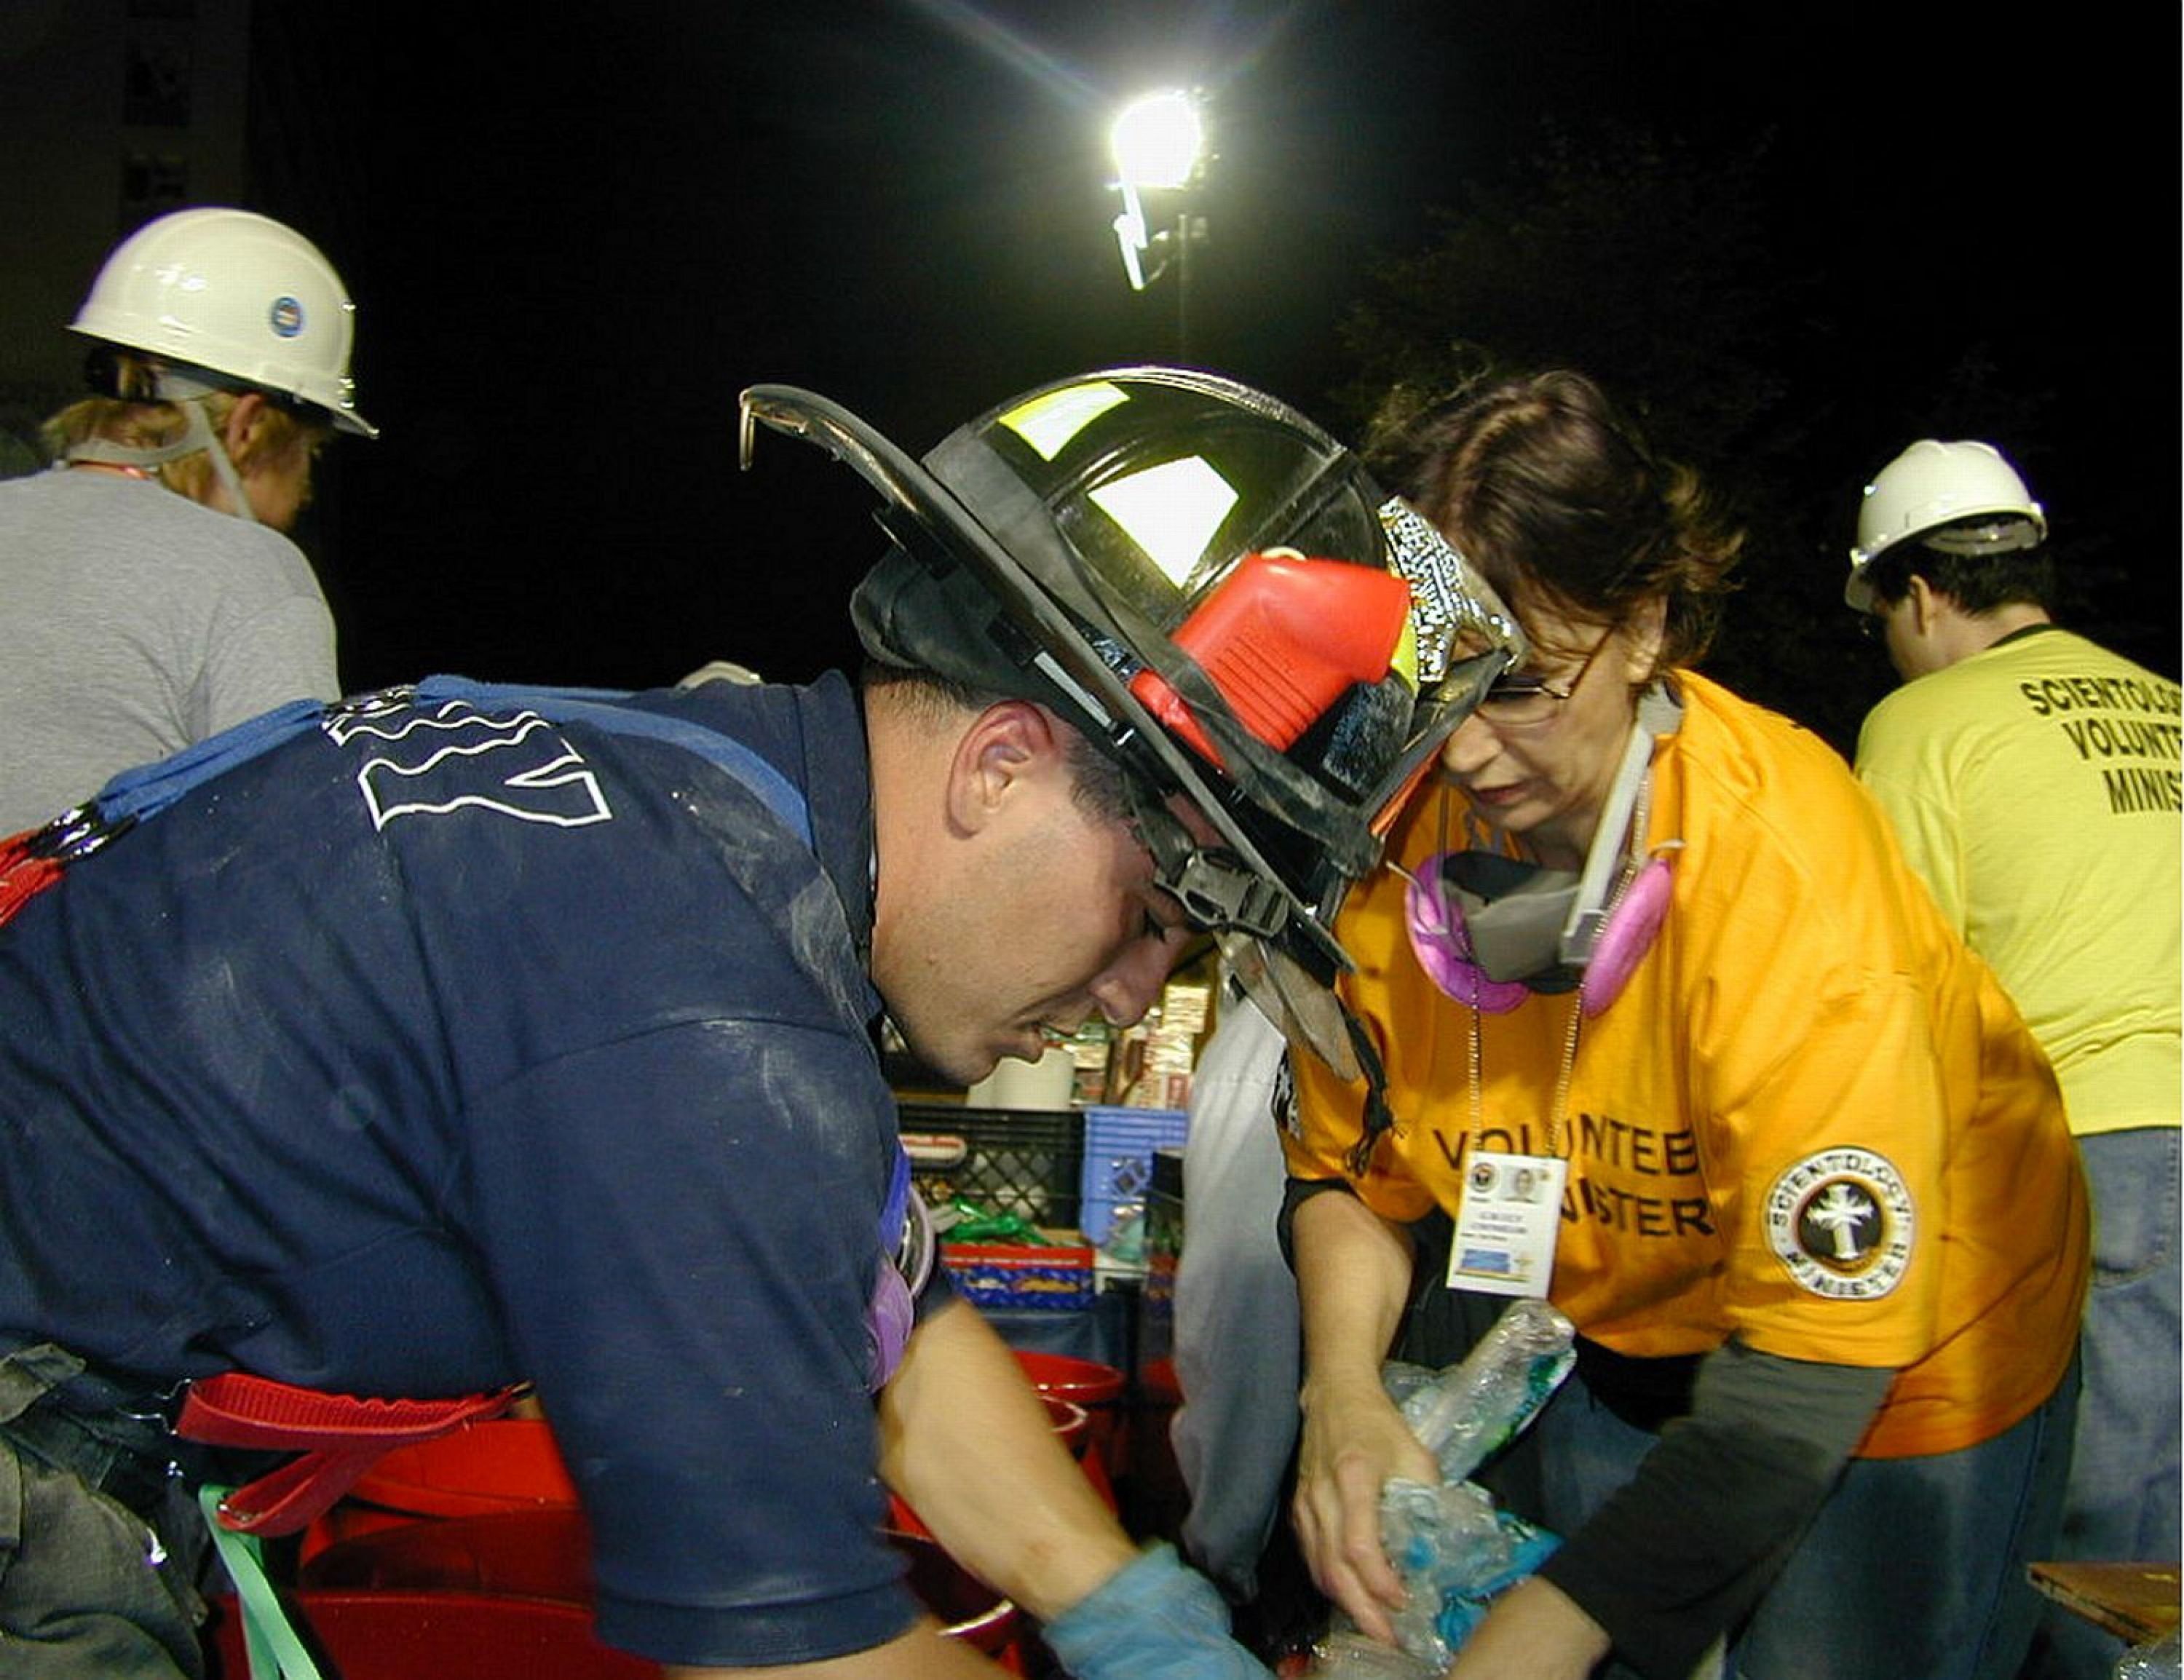 The Scientology Volunteer Ministers at Ground Zero New York inspired a global movement. Since September 11, 2001, Volunteer Ministers have served at more than 200 disaster sites.